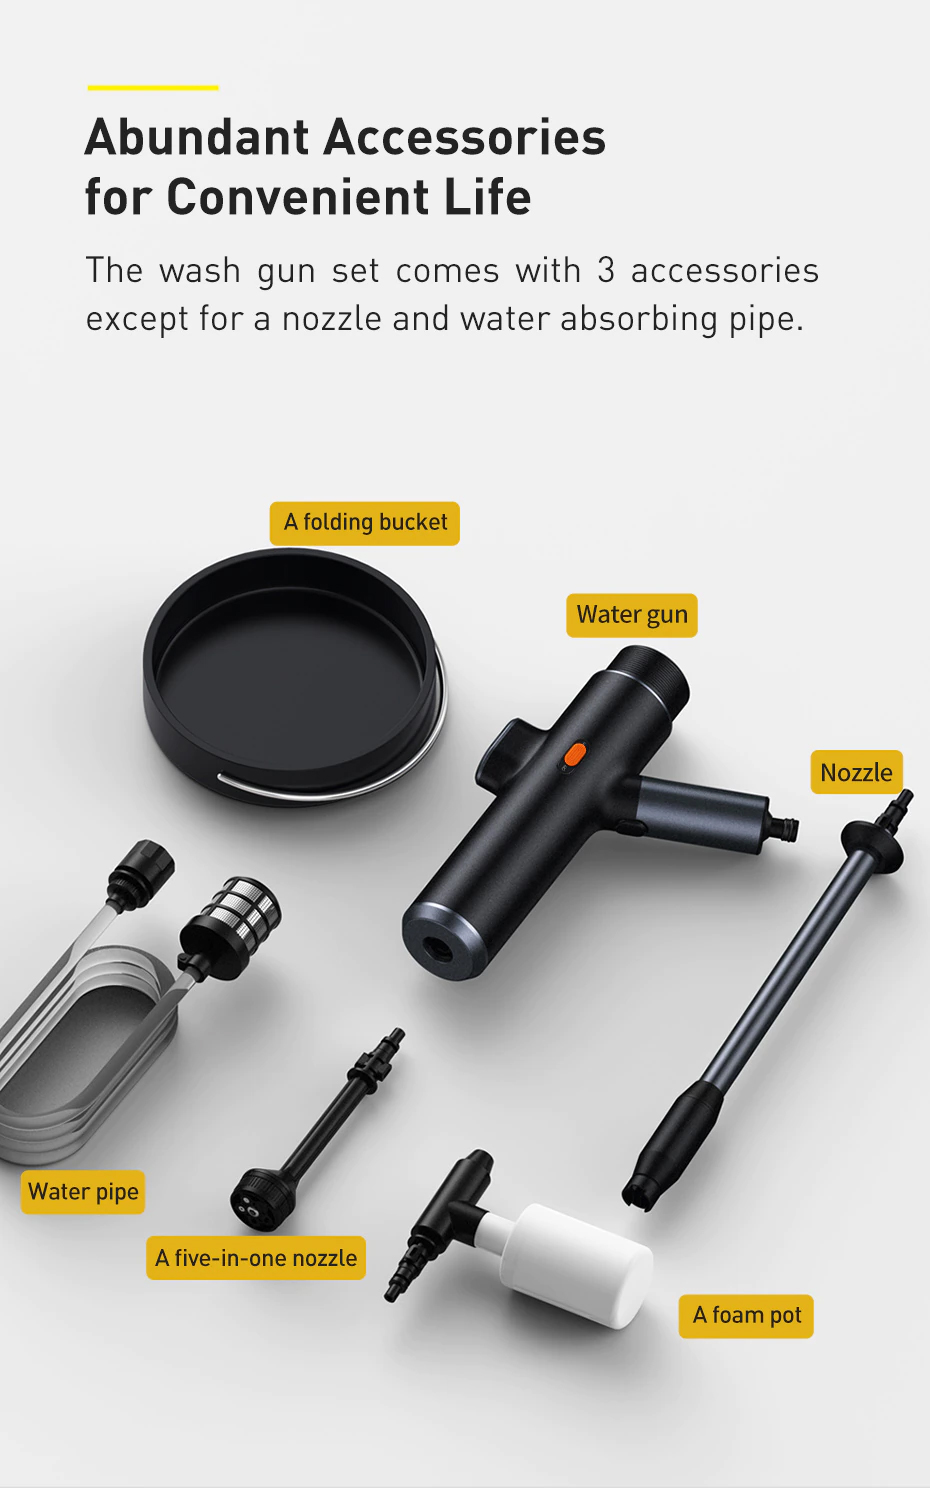 Abundant Accessories for Convenient Life The wash gun set comes with 3 accessories except for a nozzle and water absorbing pipe.